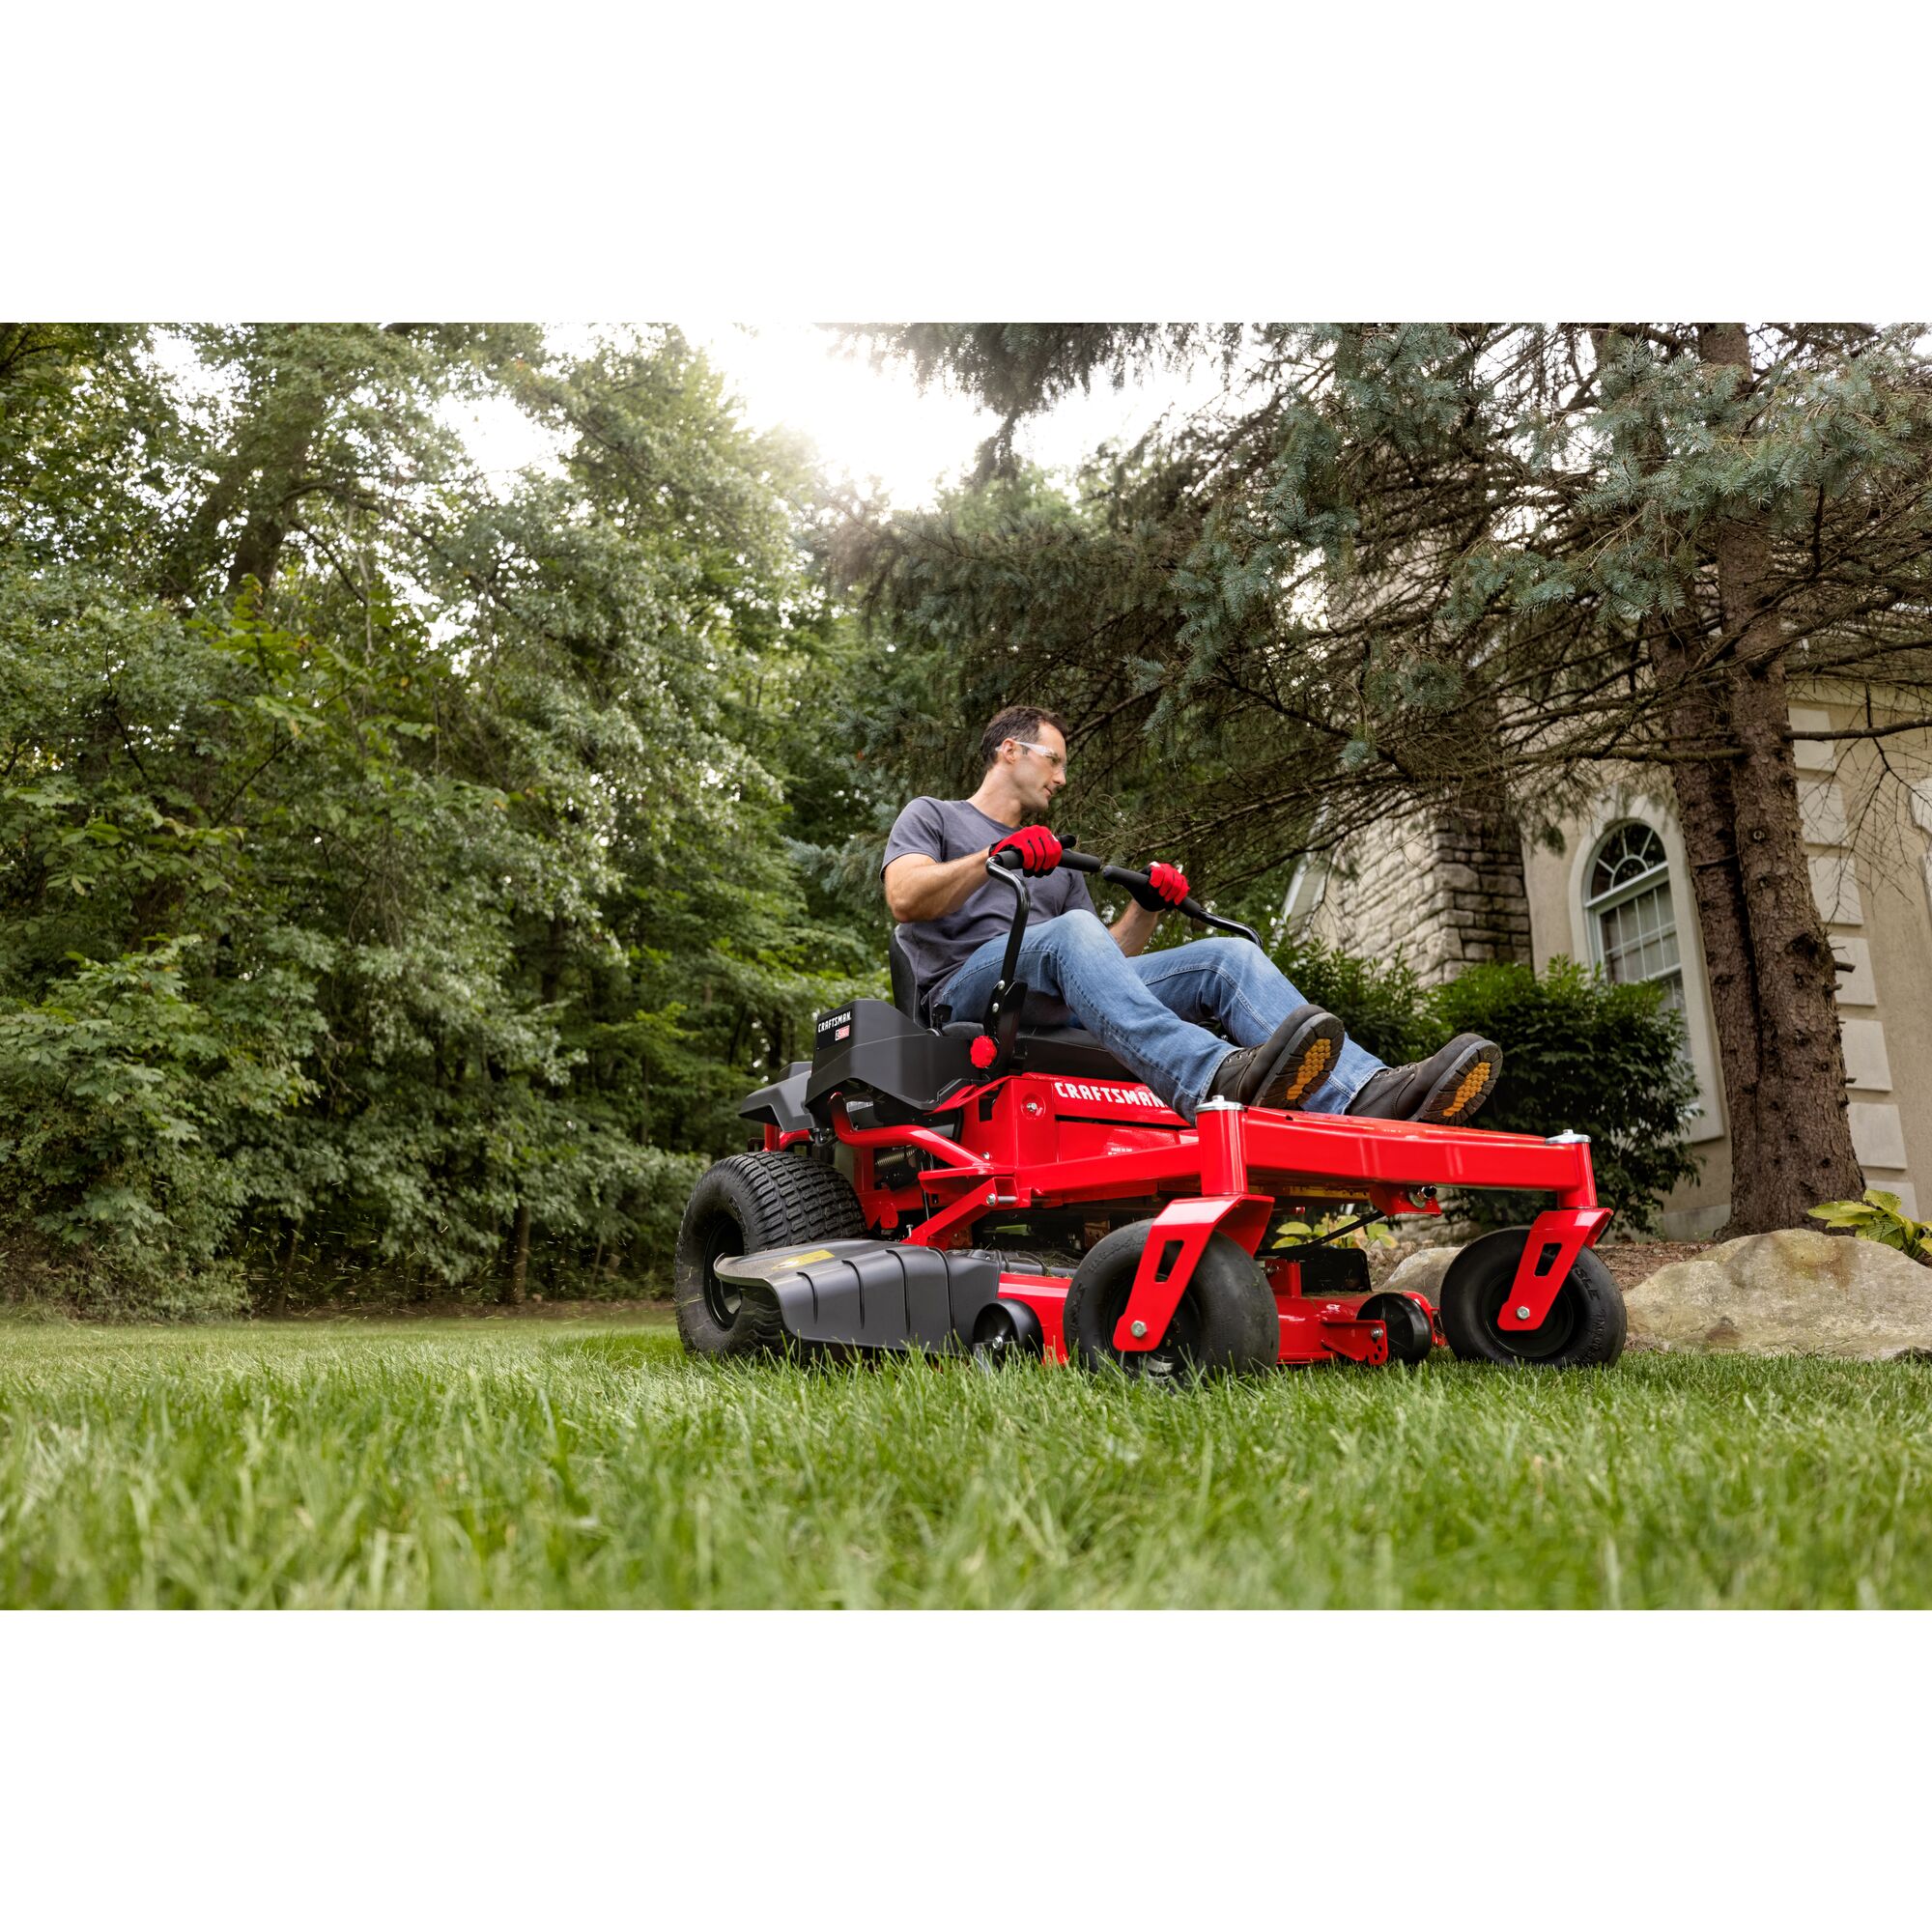 View of CRAFTSMAN Riding Mowers  being used by consumer